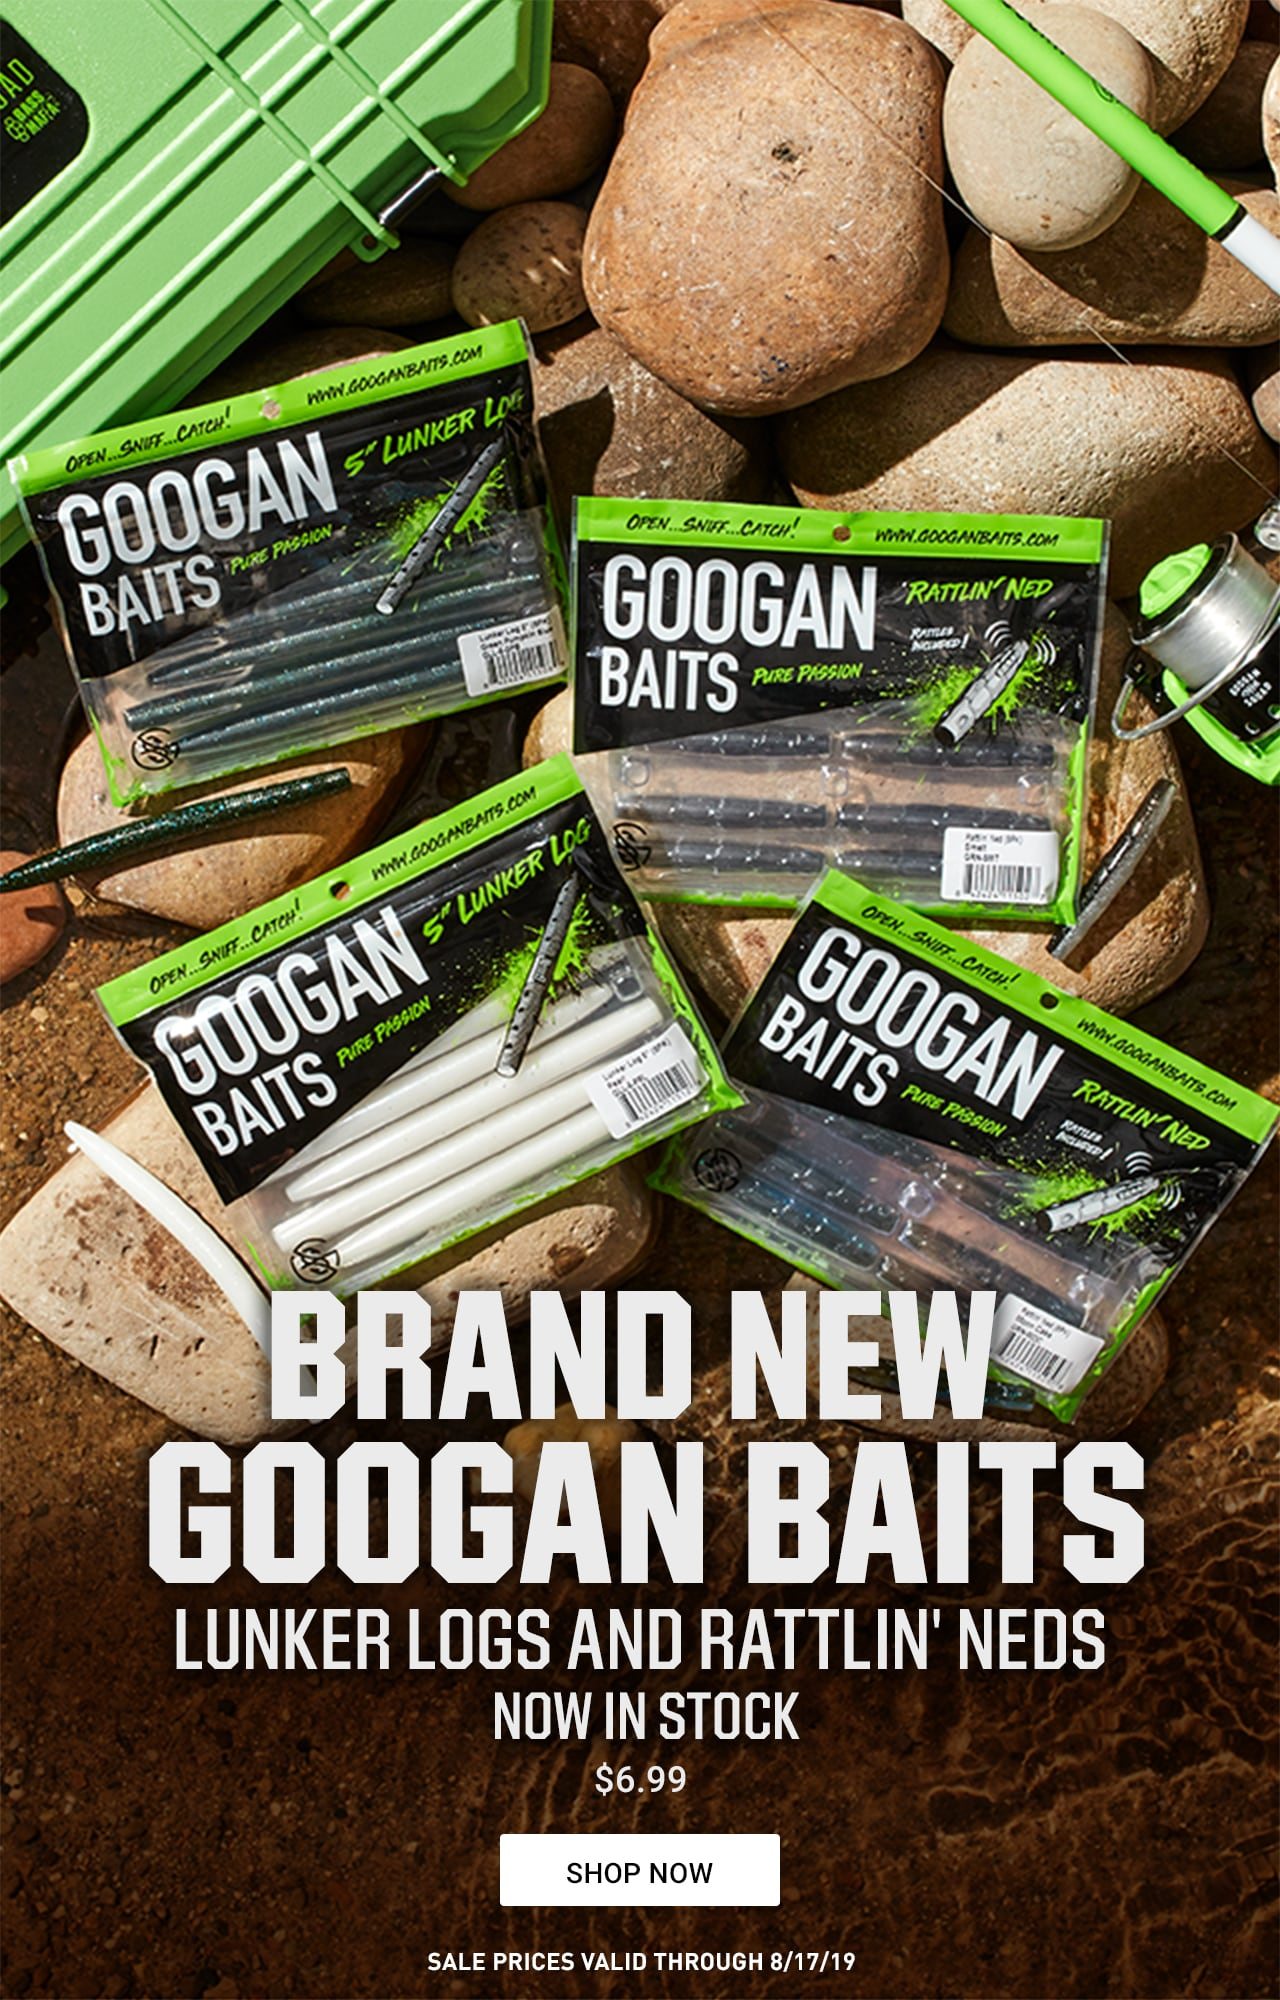 They're Here! Googan Baits Lunker Logs & Rattlin' Neds -- Now In Stock! -  DICK'S Sporting Goods Email Archive